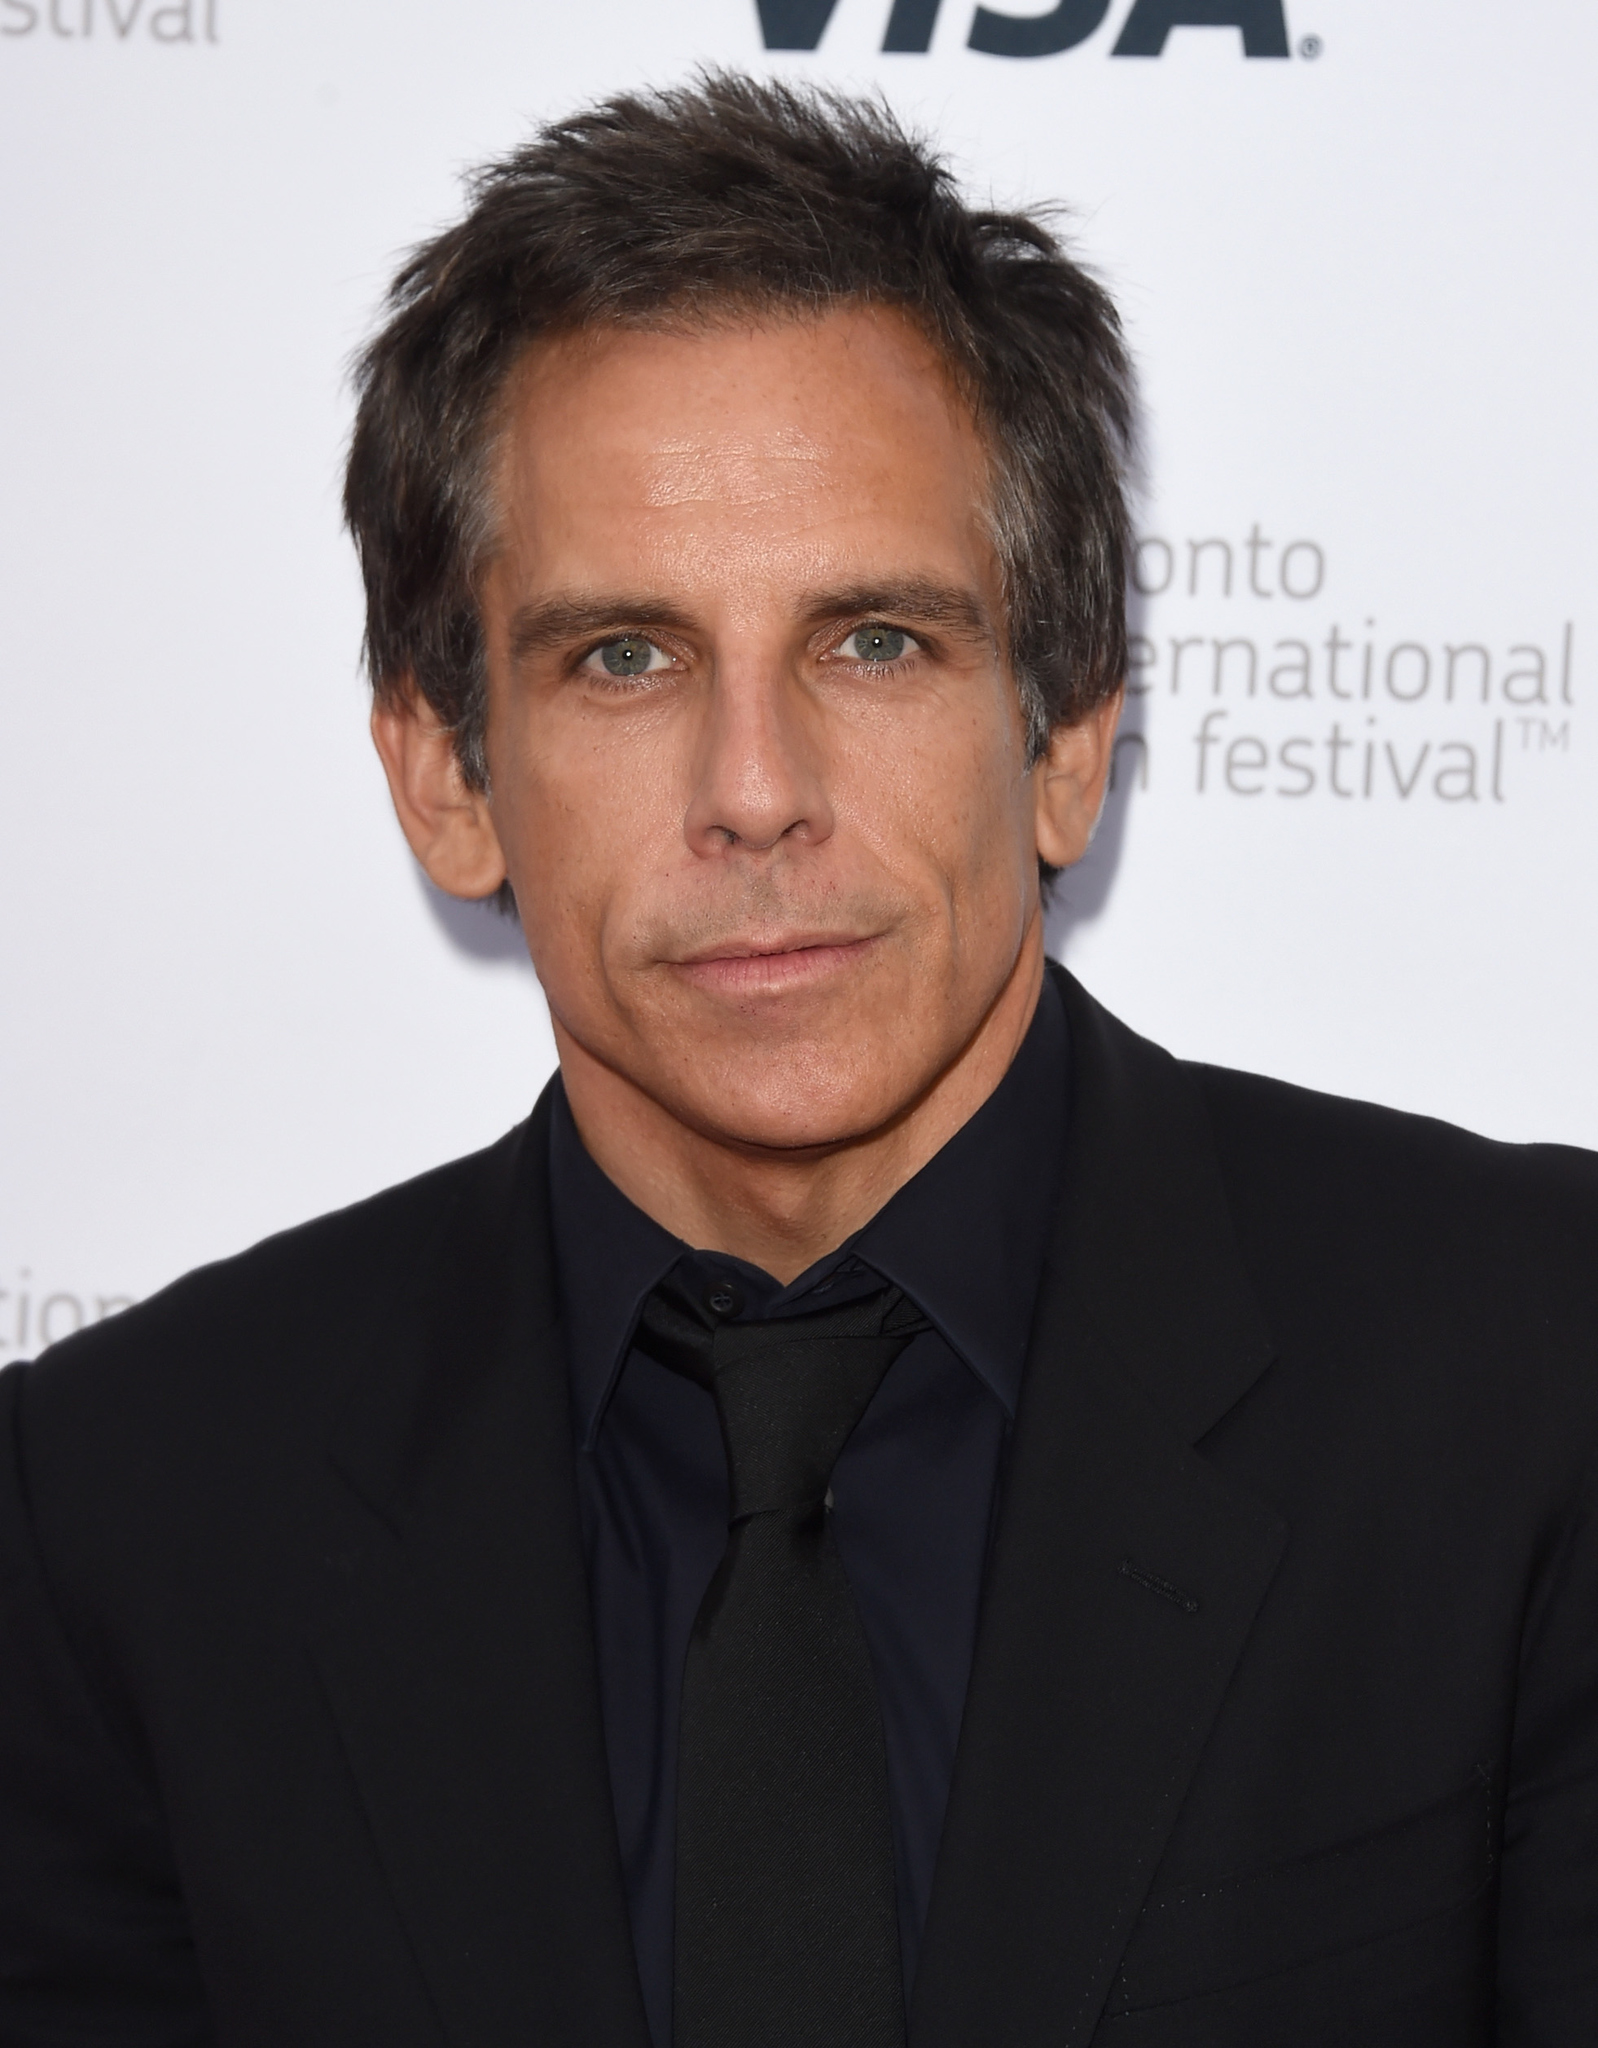 Ben Stiller at event of While We're Young (2014)